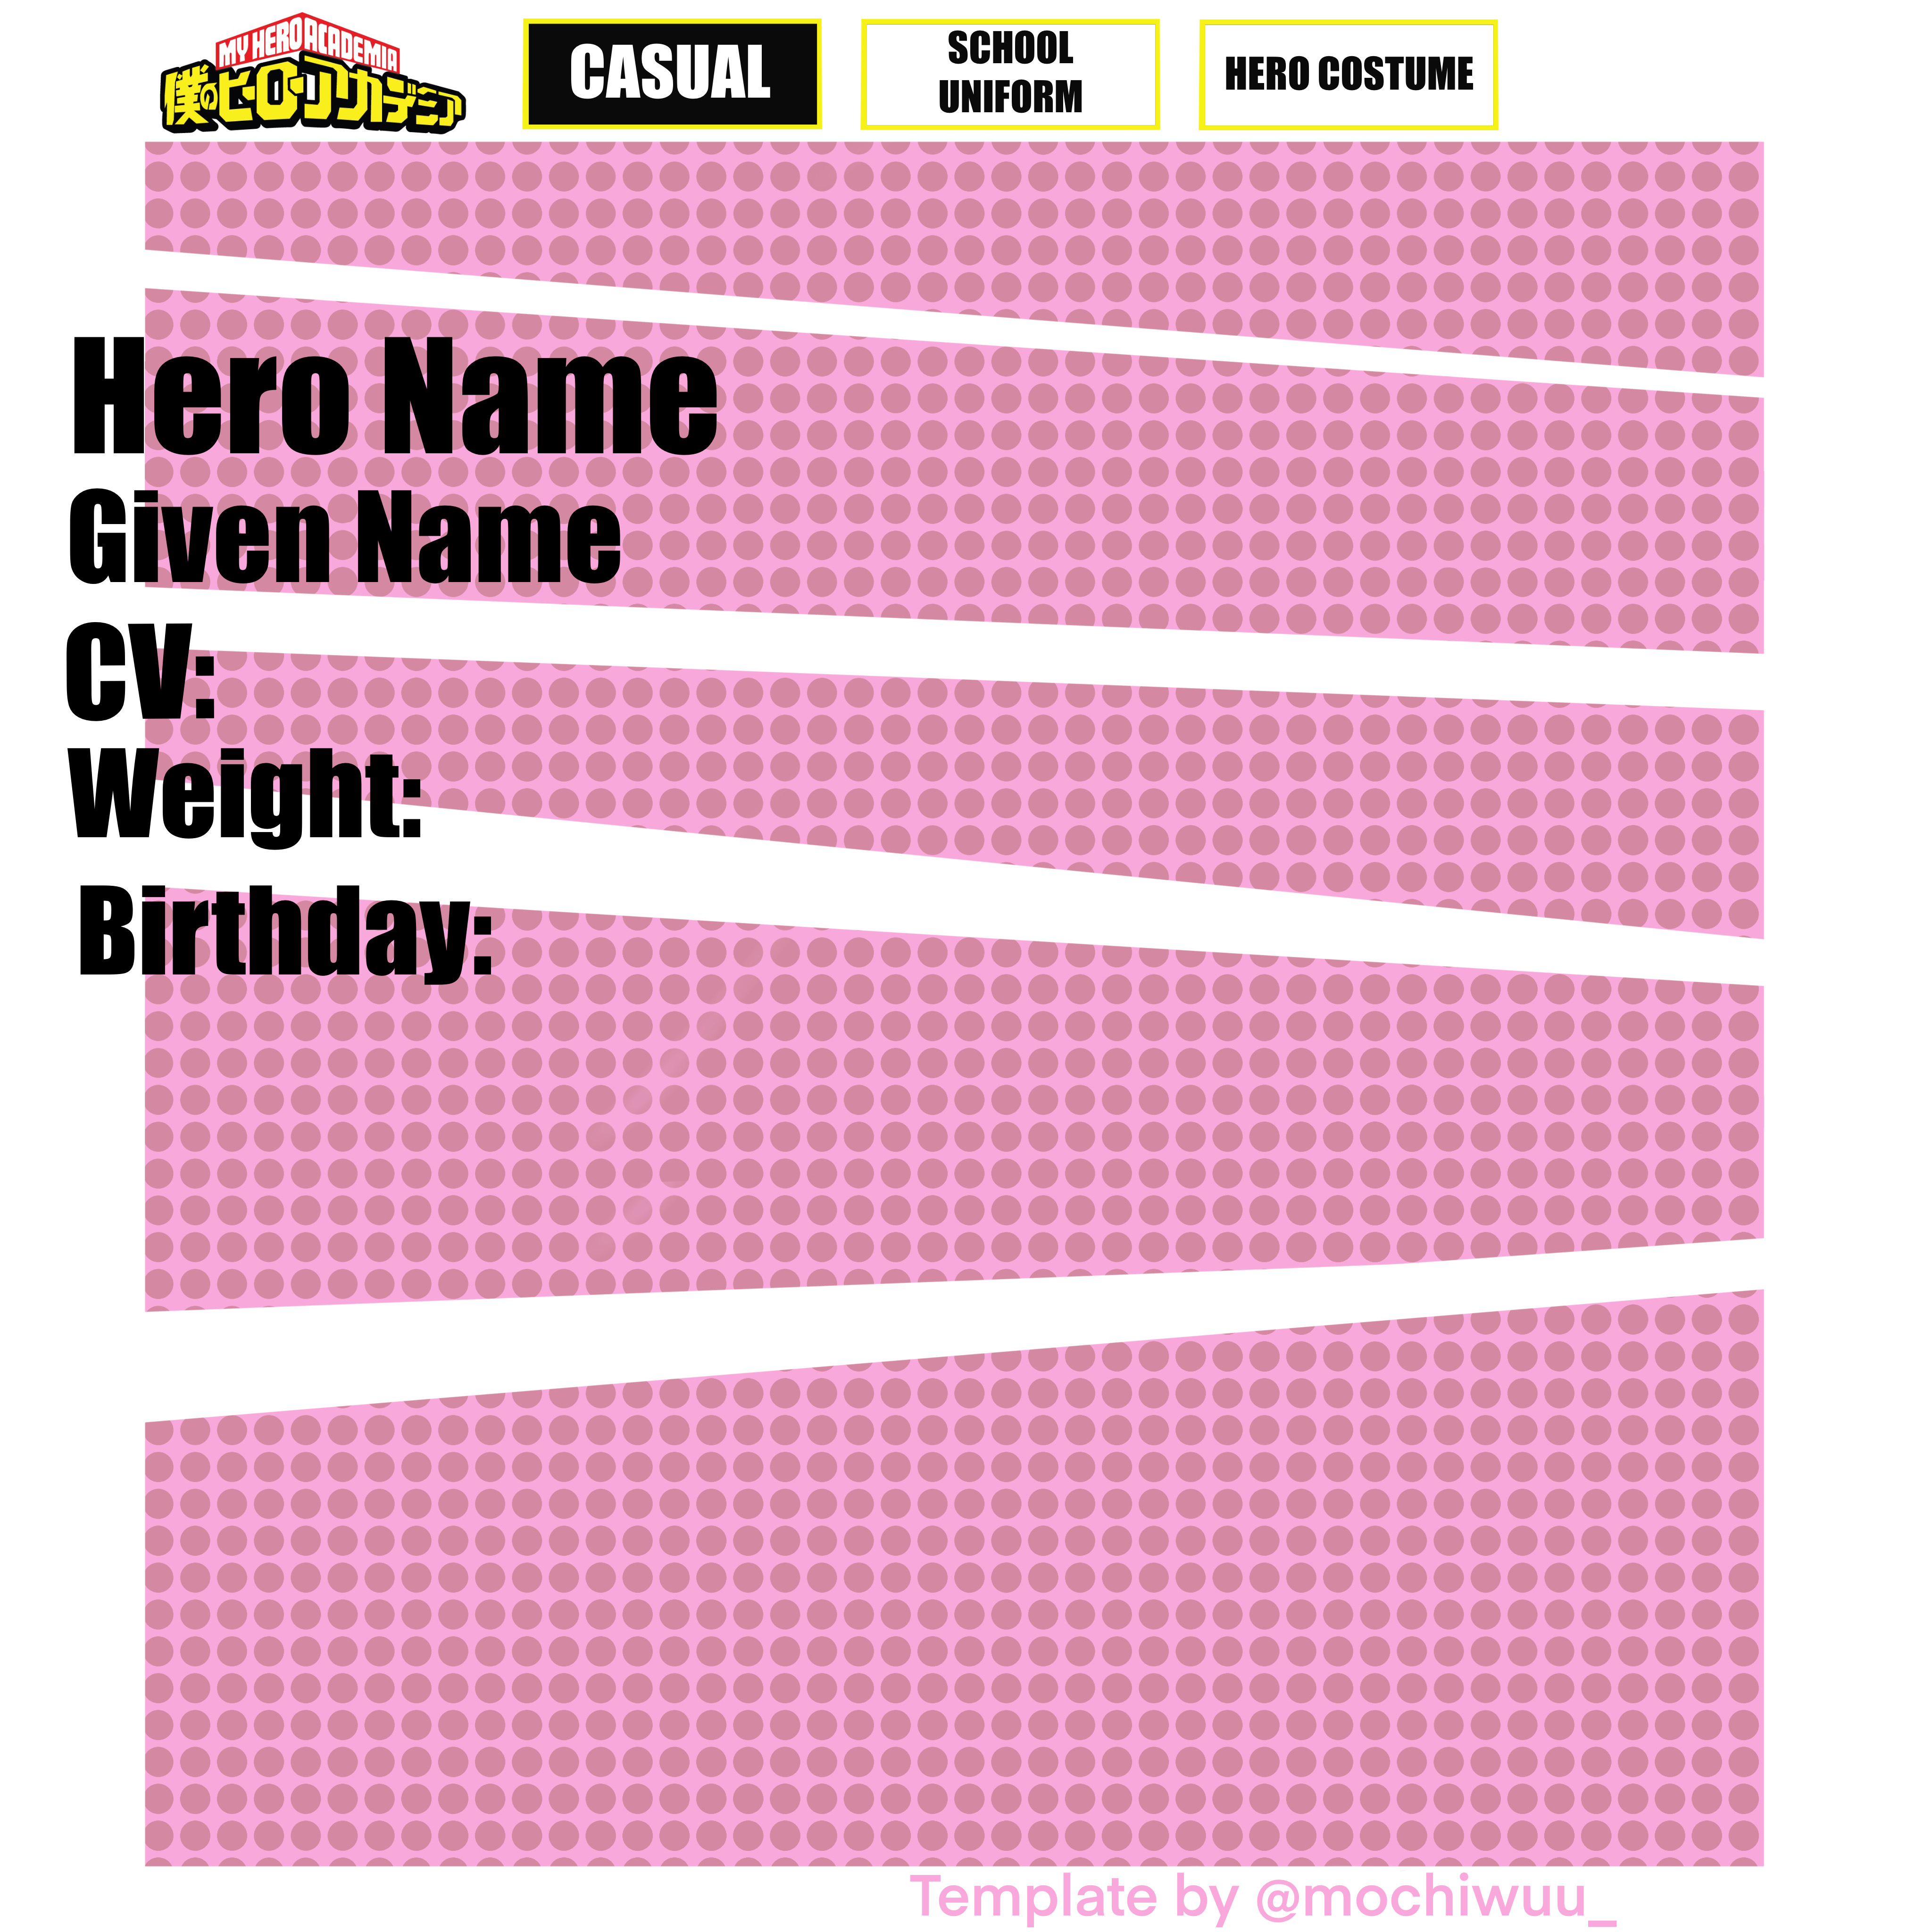 Free To Use My Hero Academia Oc Template By M0chiwuu On Deviantart